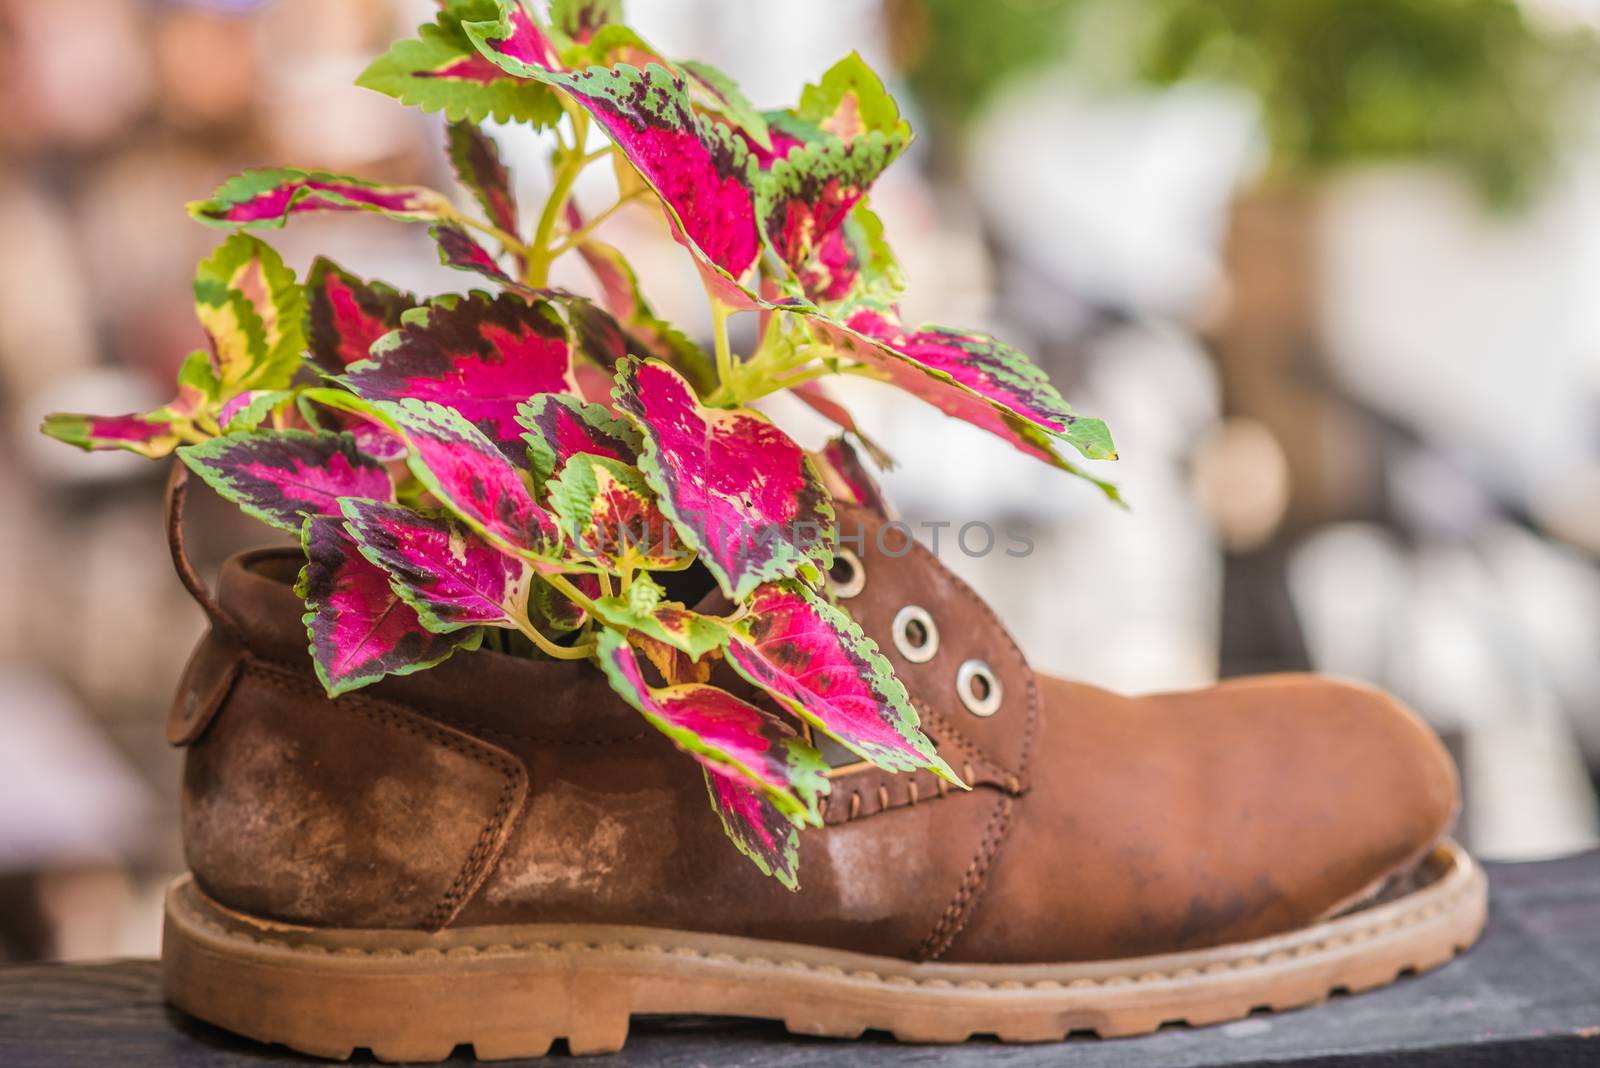 Fresh colorful plants growing in an old tattered brown shoe